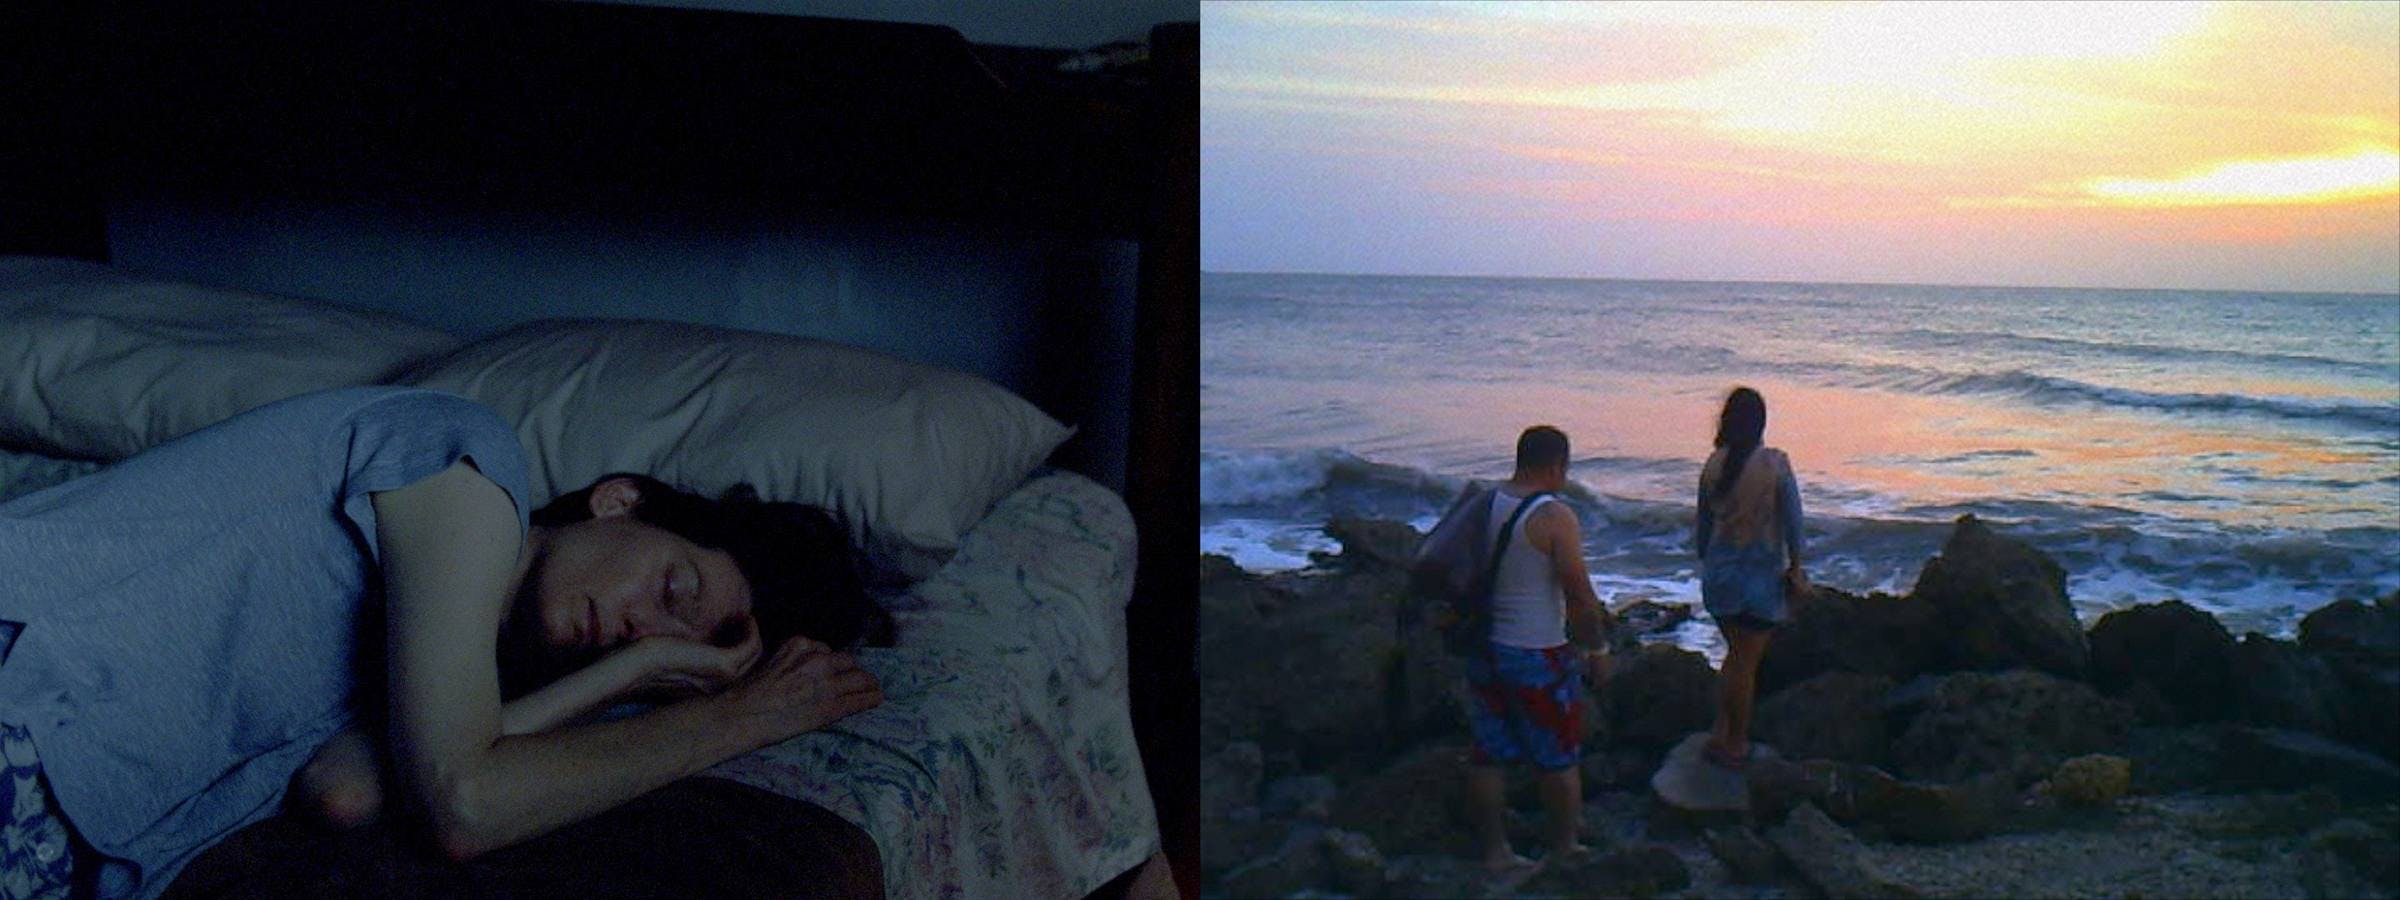 A split screen projection. On the left we can see a person sleeping, on the right 2 peole are walking over some rocks on the beach at sunset